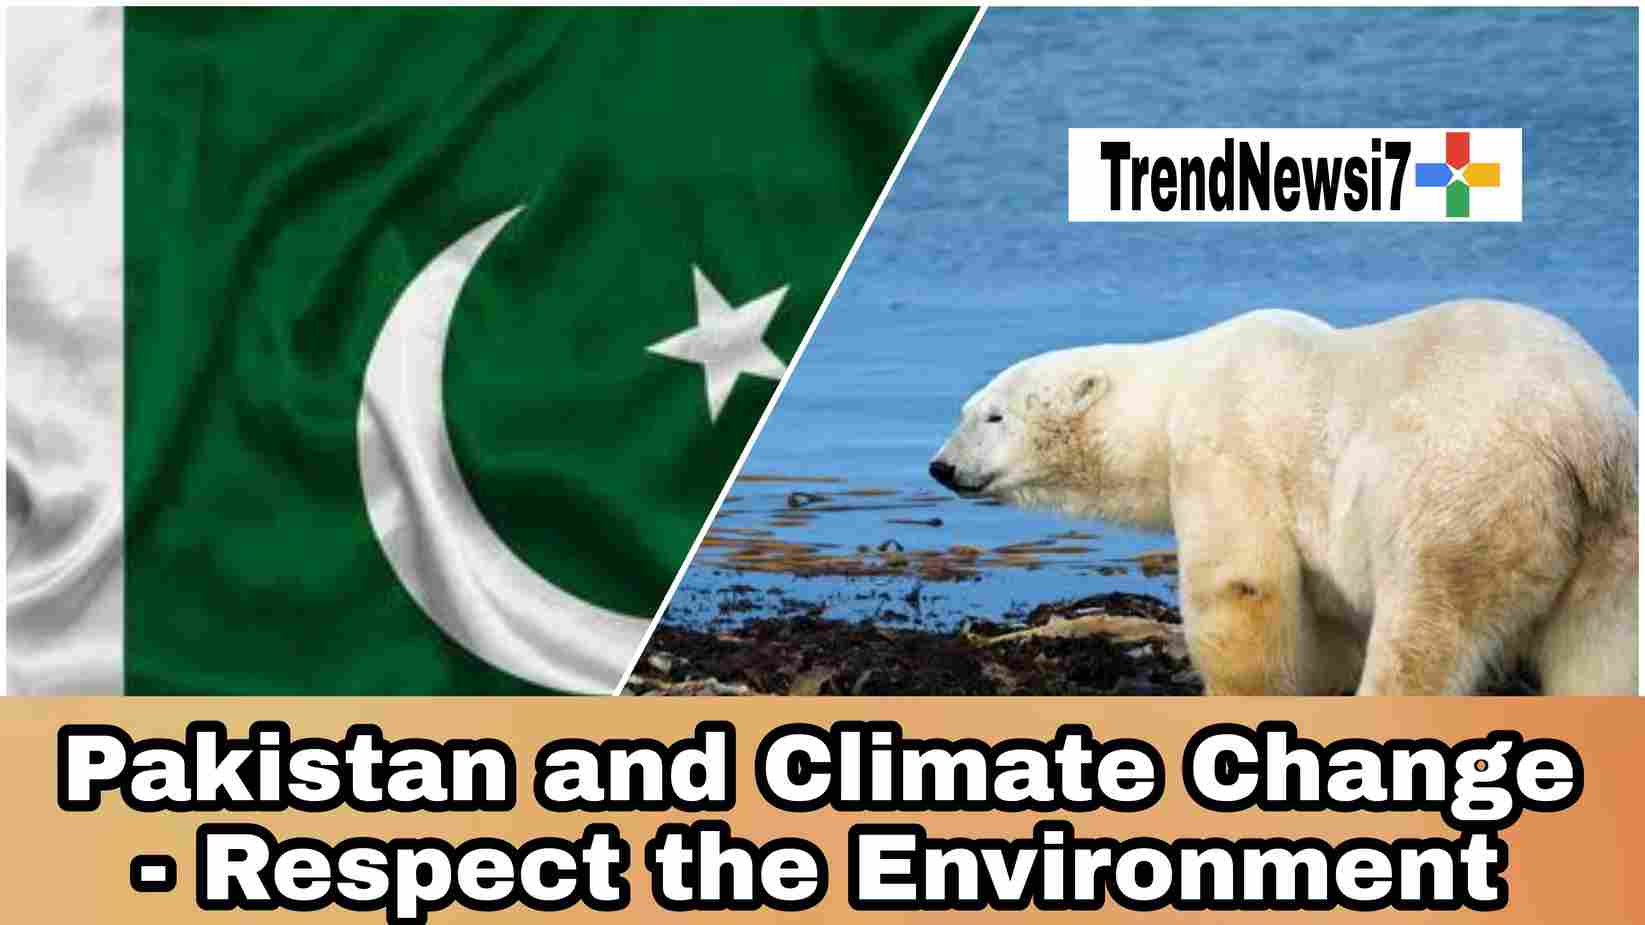 Pakistan and Climate Change - Respect the Environment